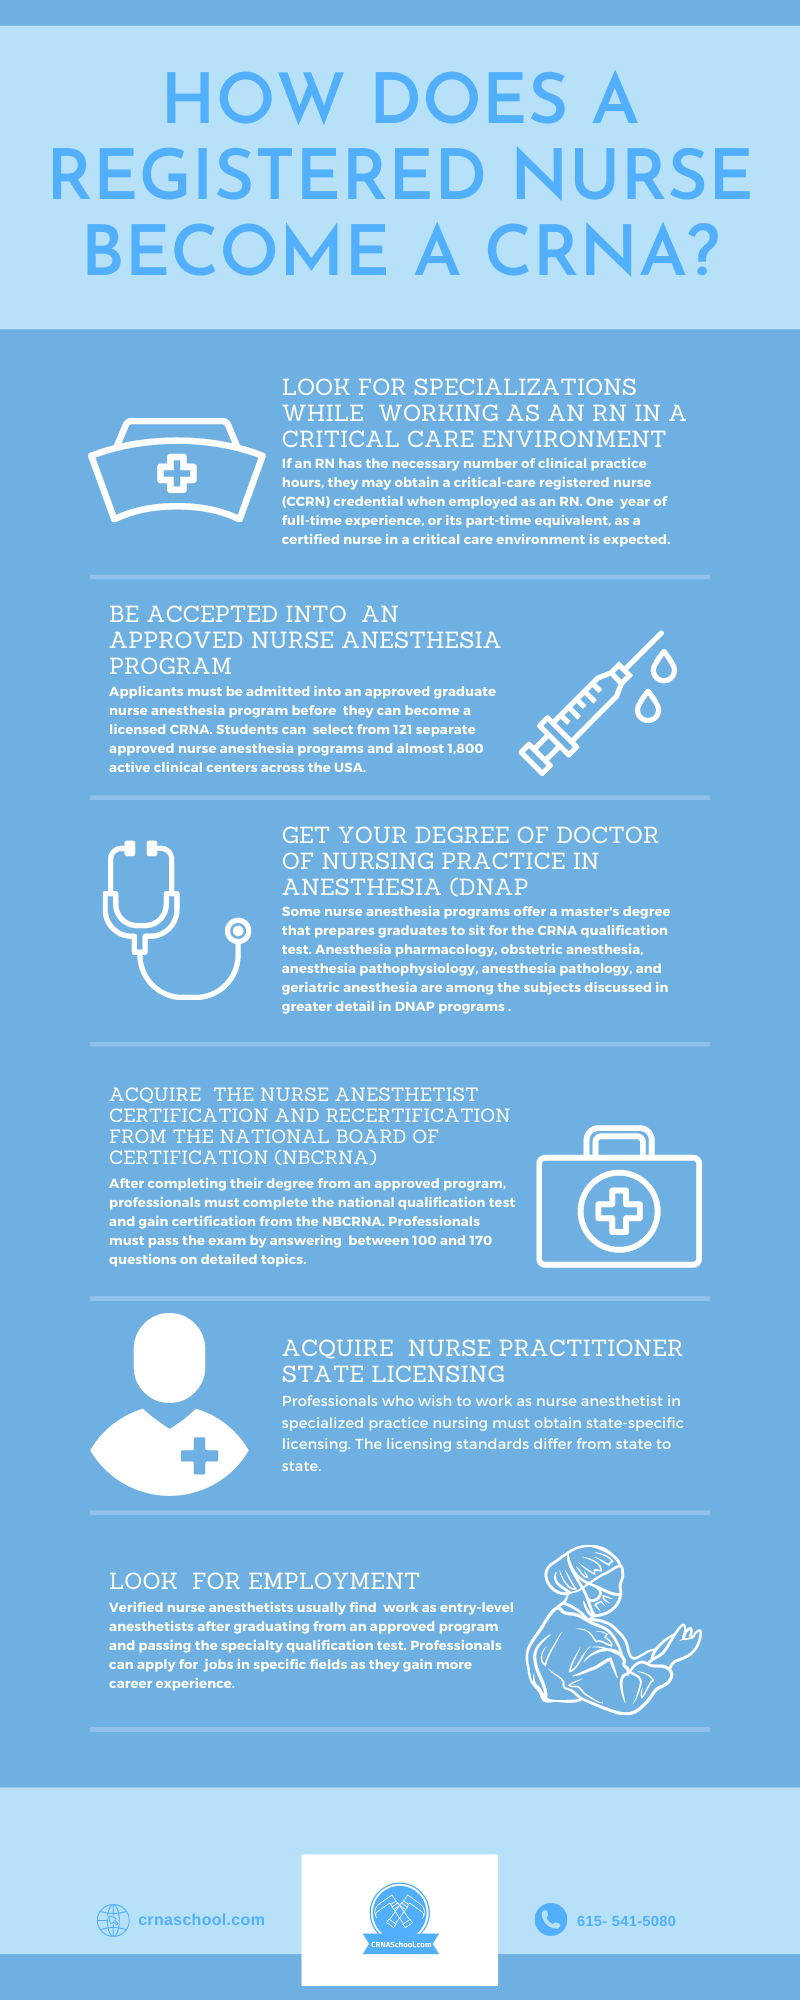 CRNA Qualifications and Capabilities 